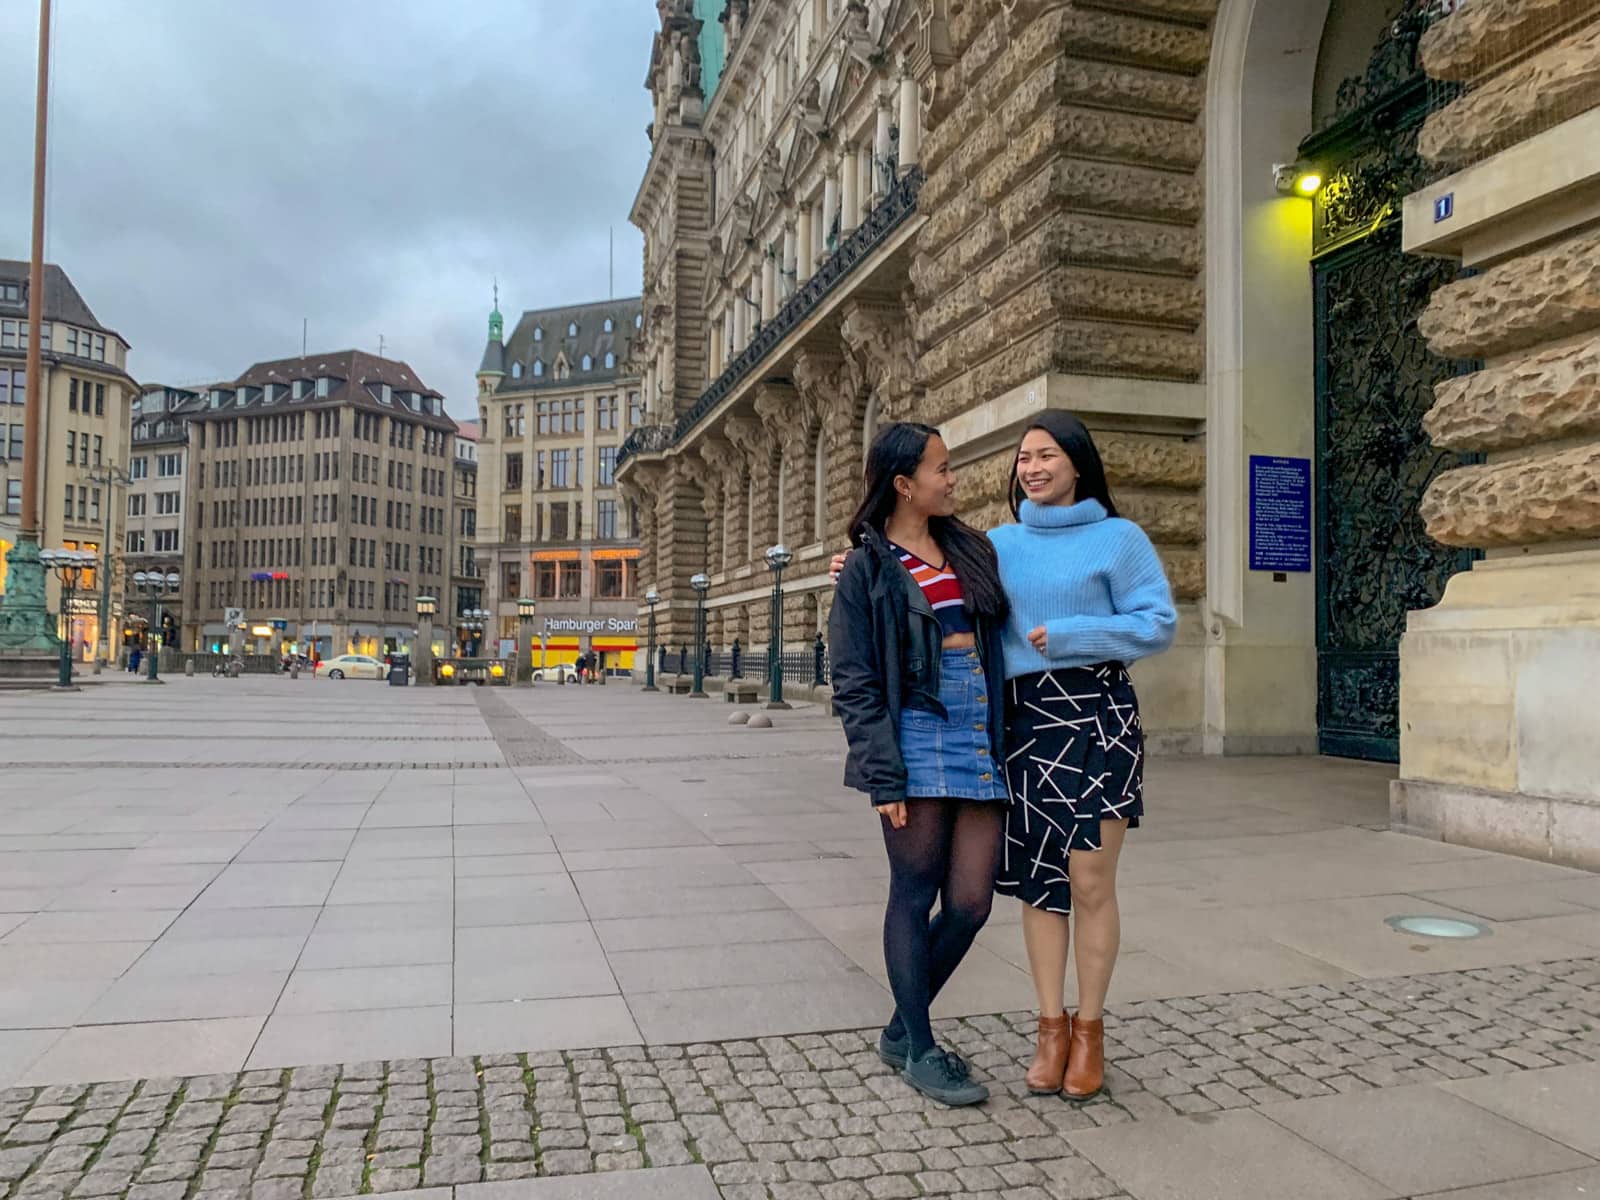 Two women smiling, with their arms around each other. Both have dark hair. One is wearing a striped coloured top and a black jacket with a blue skirt, the other is wearing a light blue sweater with a black-and-white patterned skirt. They are in a street setting in Hamburg, Germany